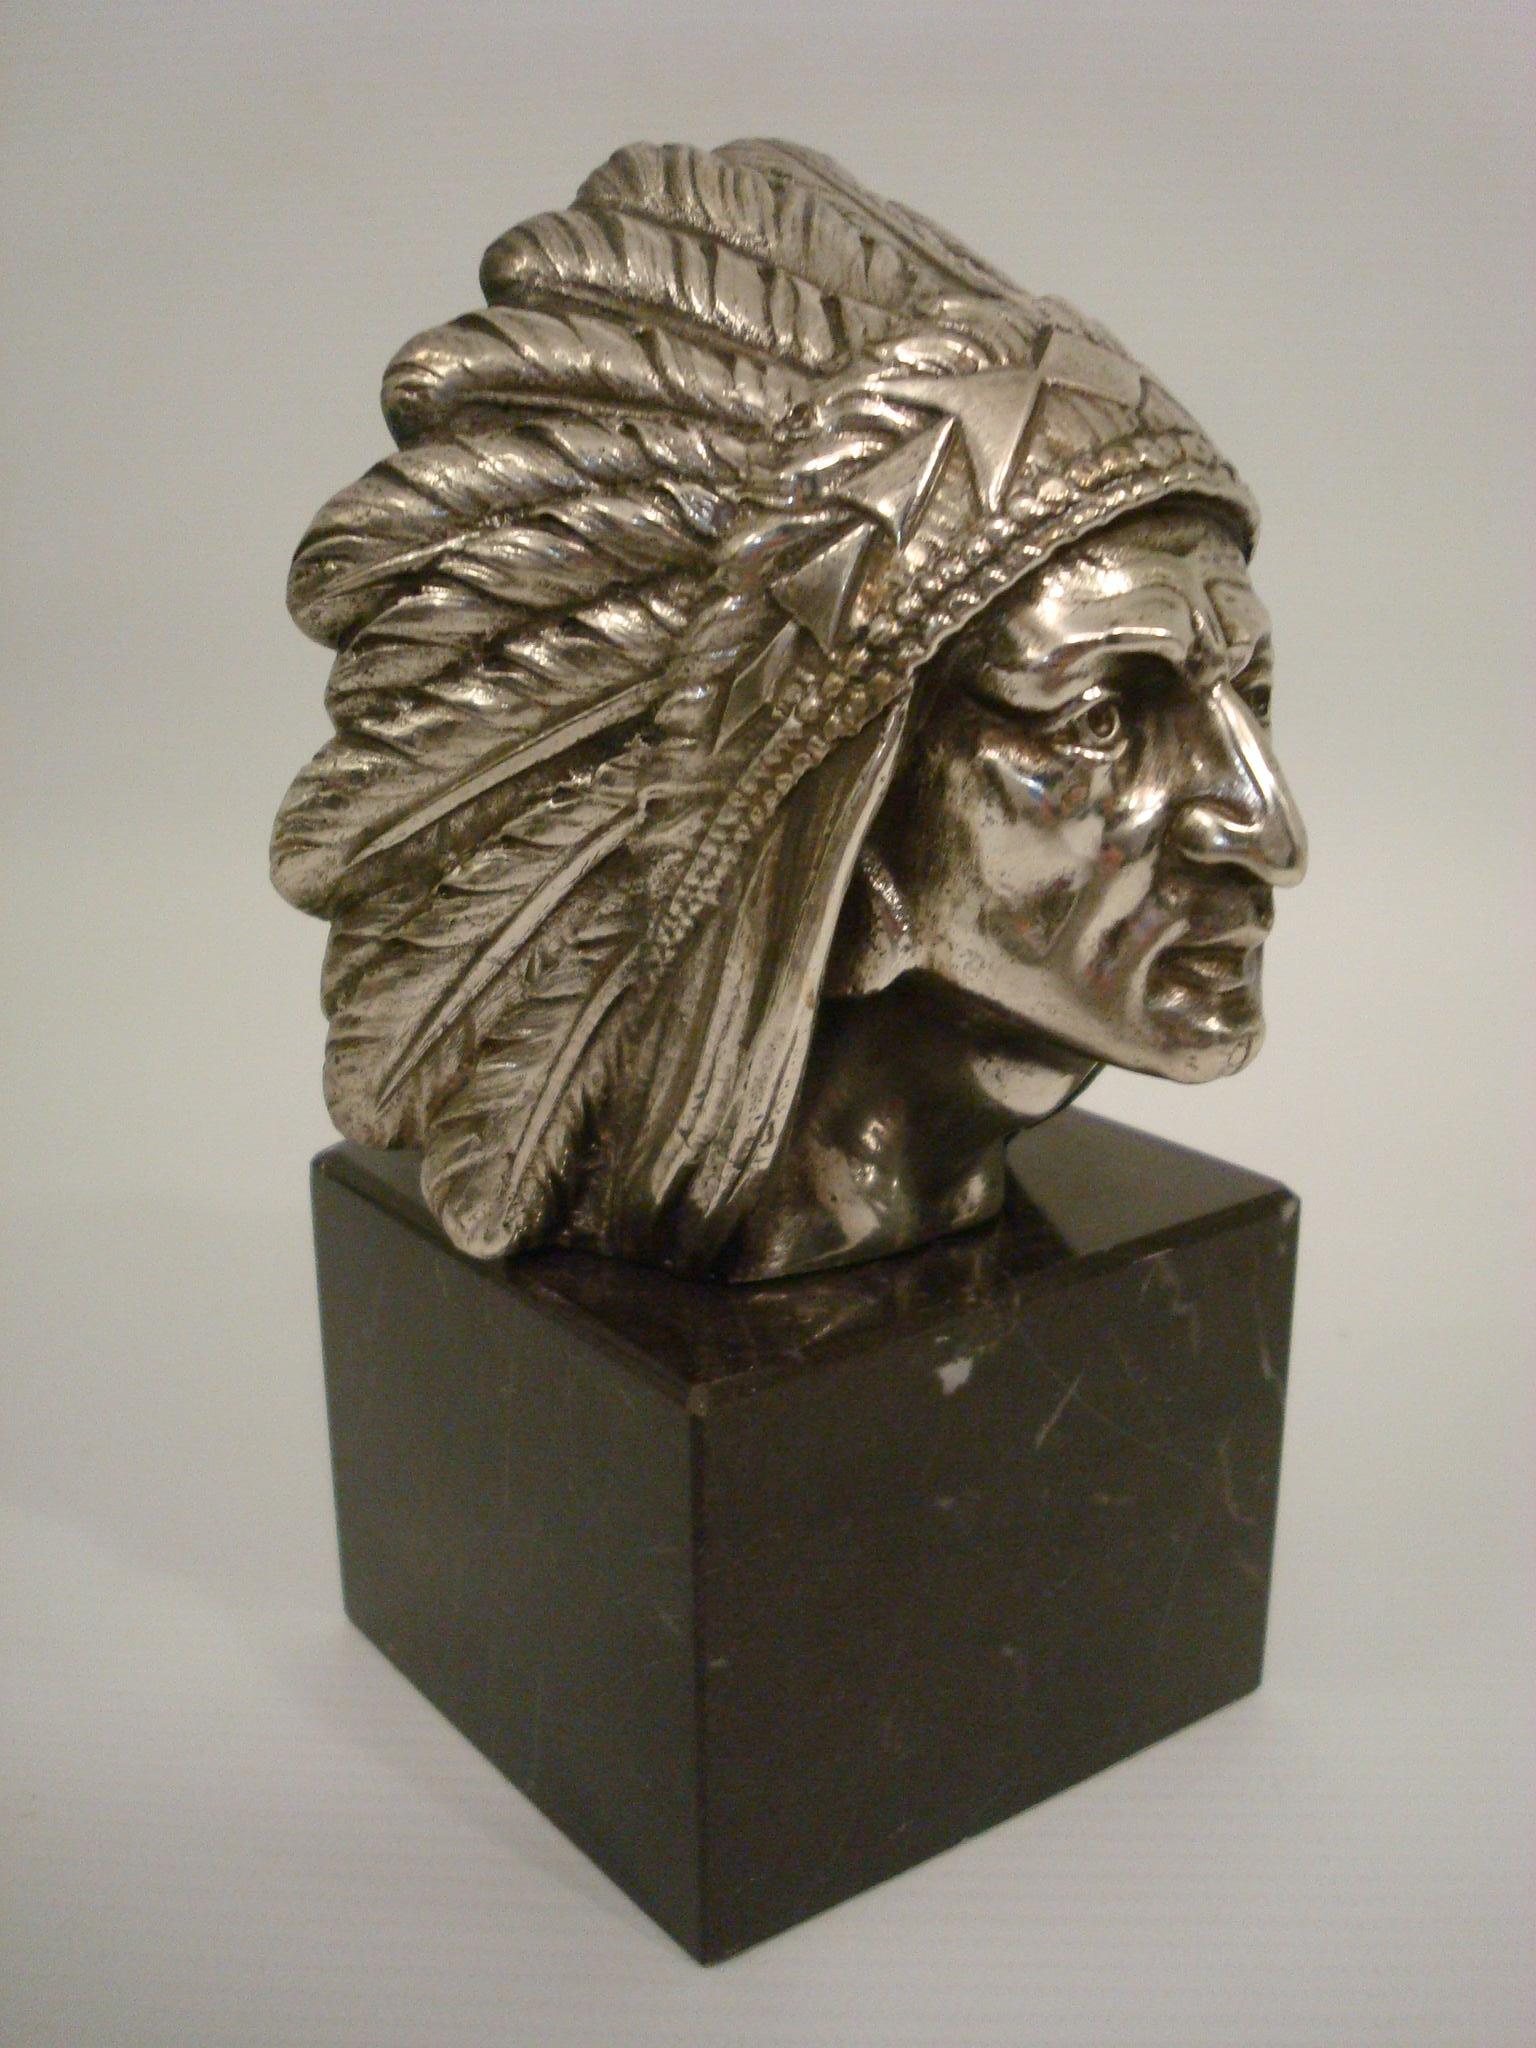 Apache indian Chief Head Car Mascot - Hood Ornament / Paperweight.
Designed by H. Briand publisher, Paris. Silvered bronze. Mounted over a black marble base. It has a hole at the back of the head, so you could use it with a termometer. 

Mascotte